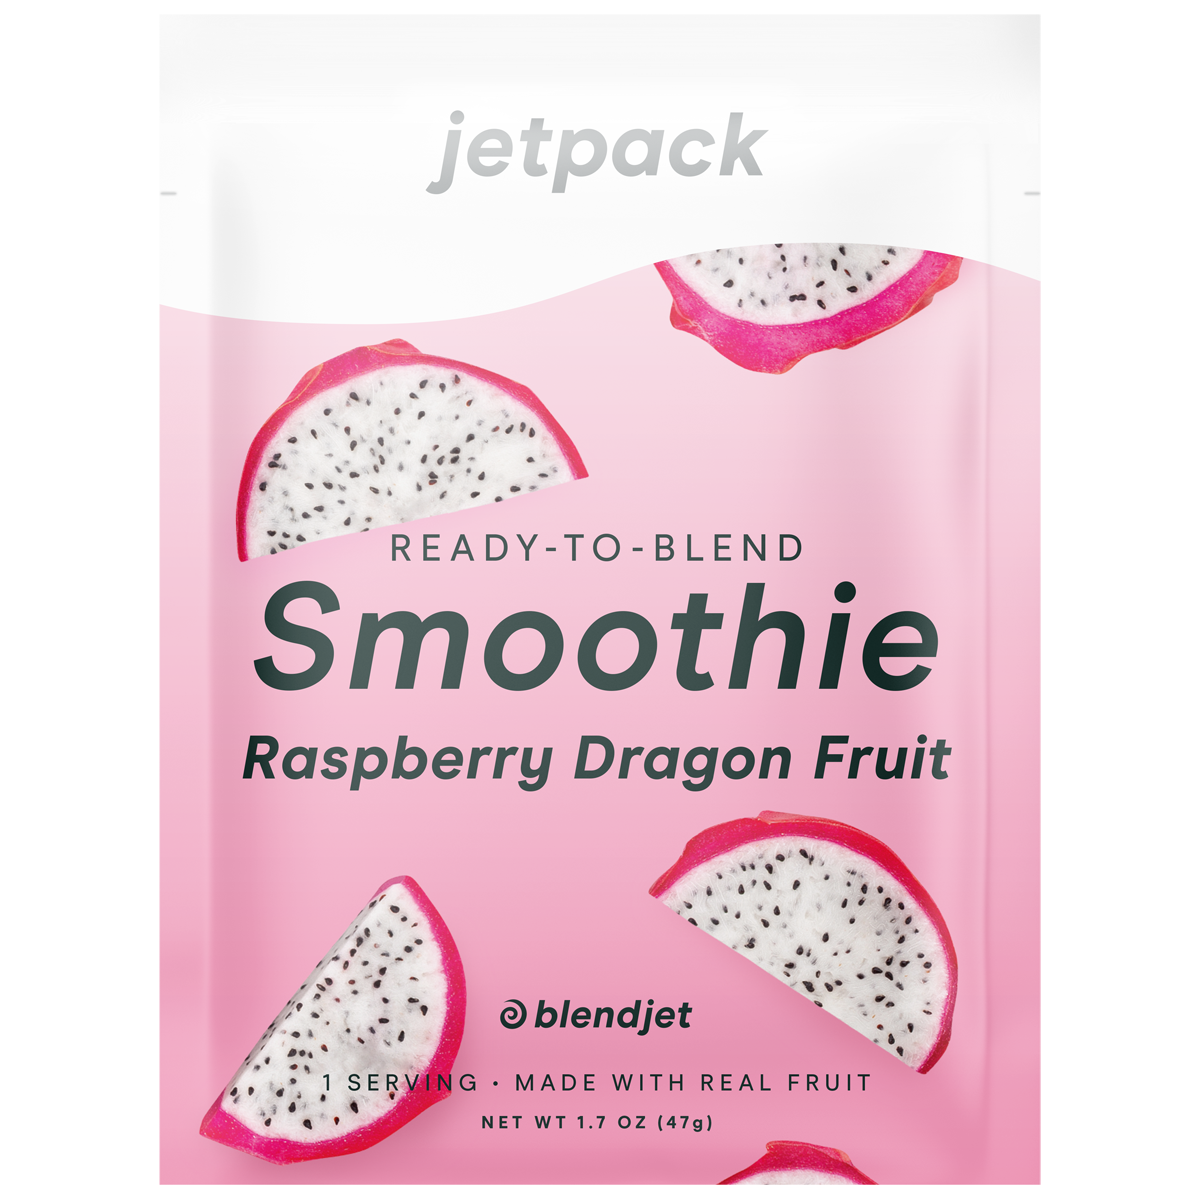 jetpack image Instant Smoothies